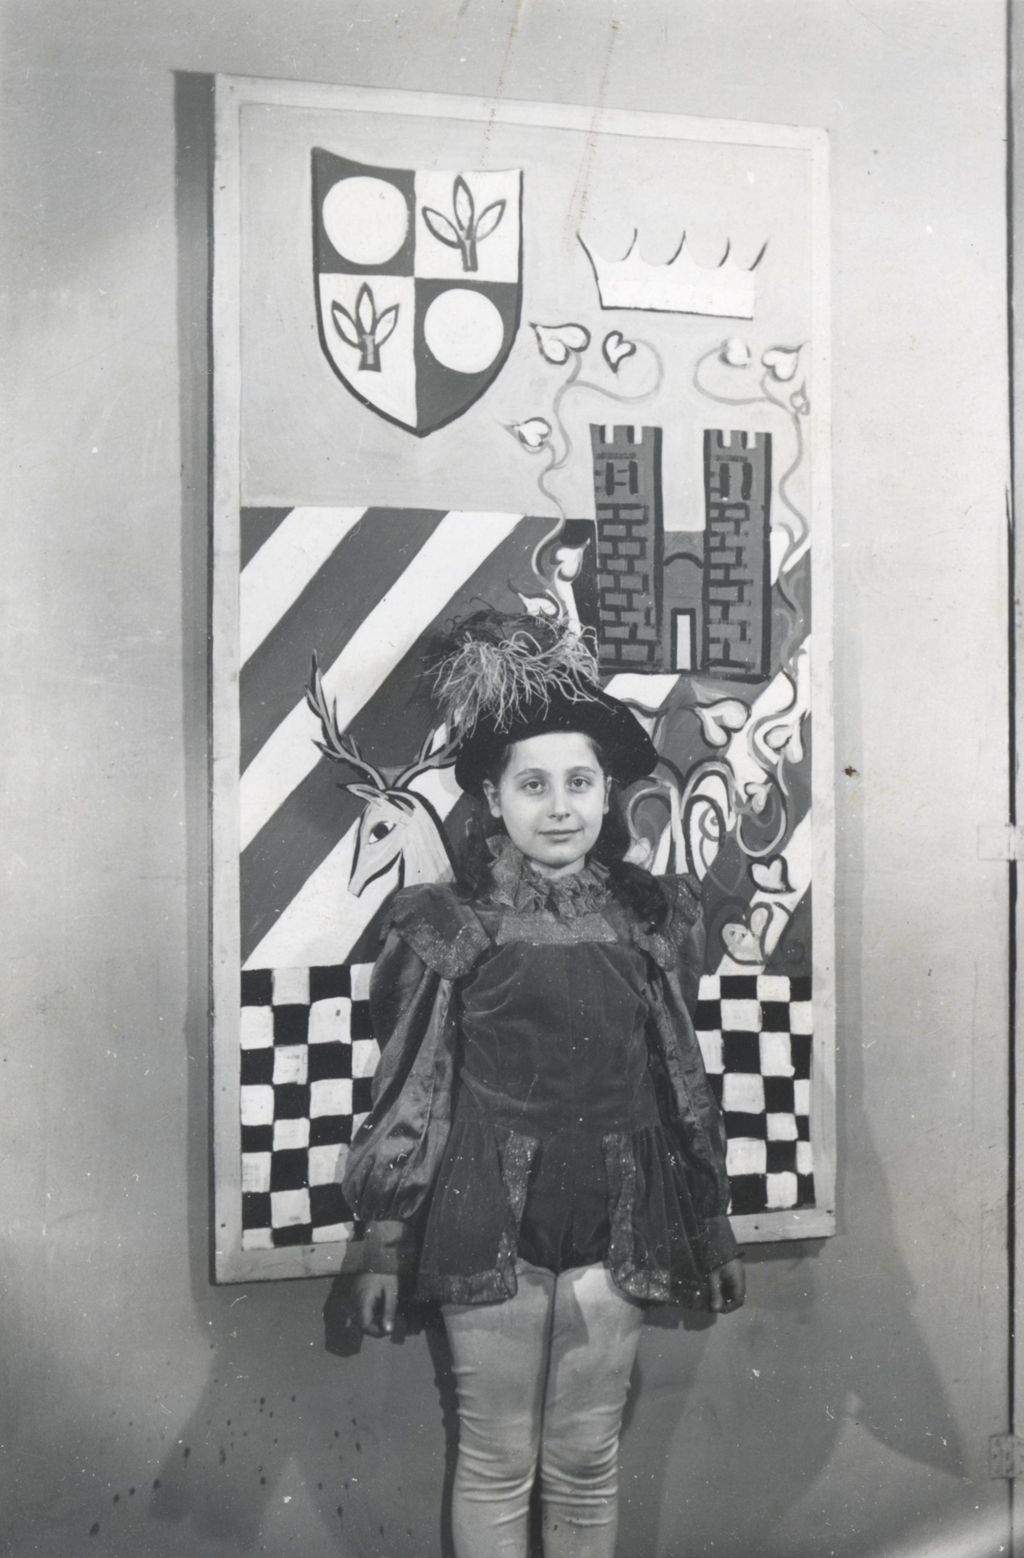 Miniature of Performer from Hull-House Junior Theatre production of "Cinderella"